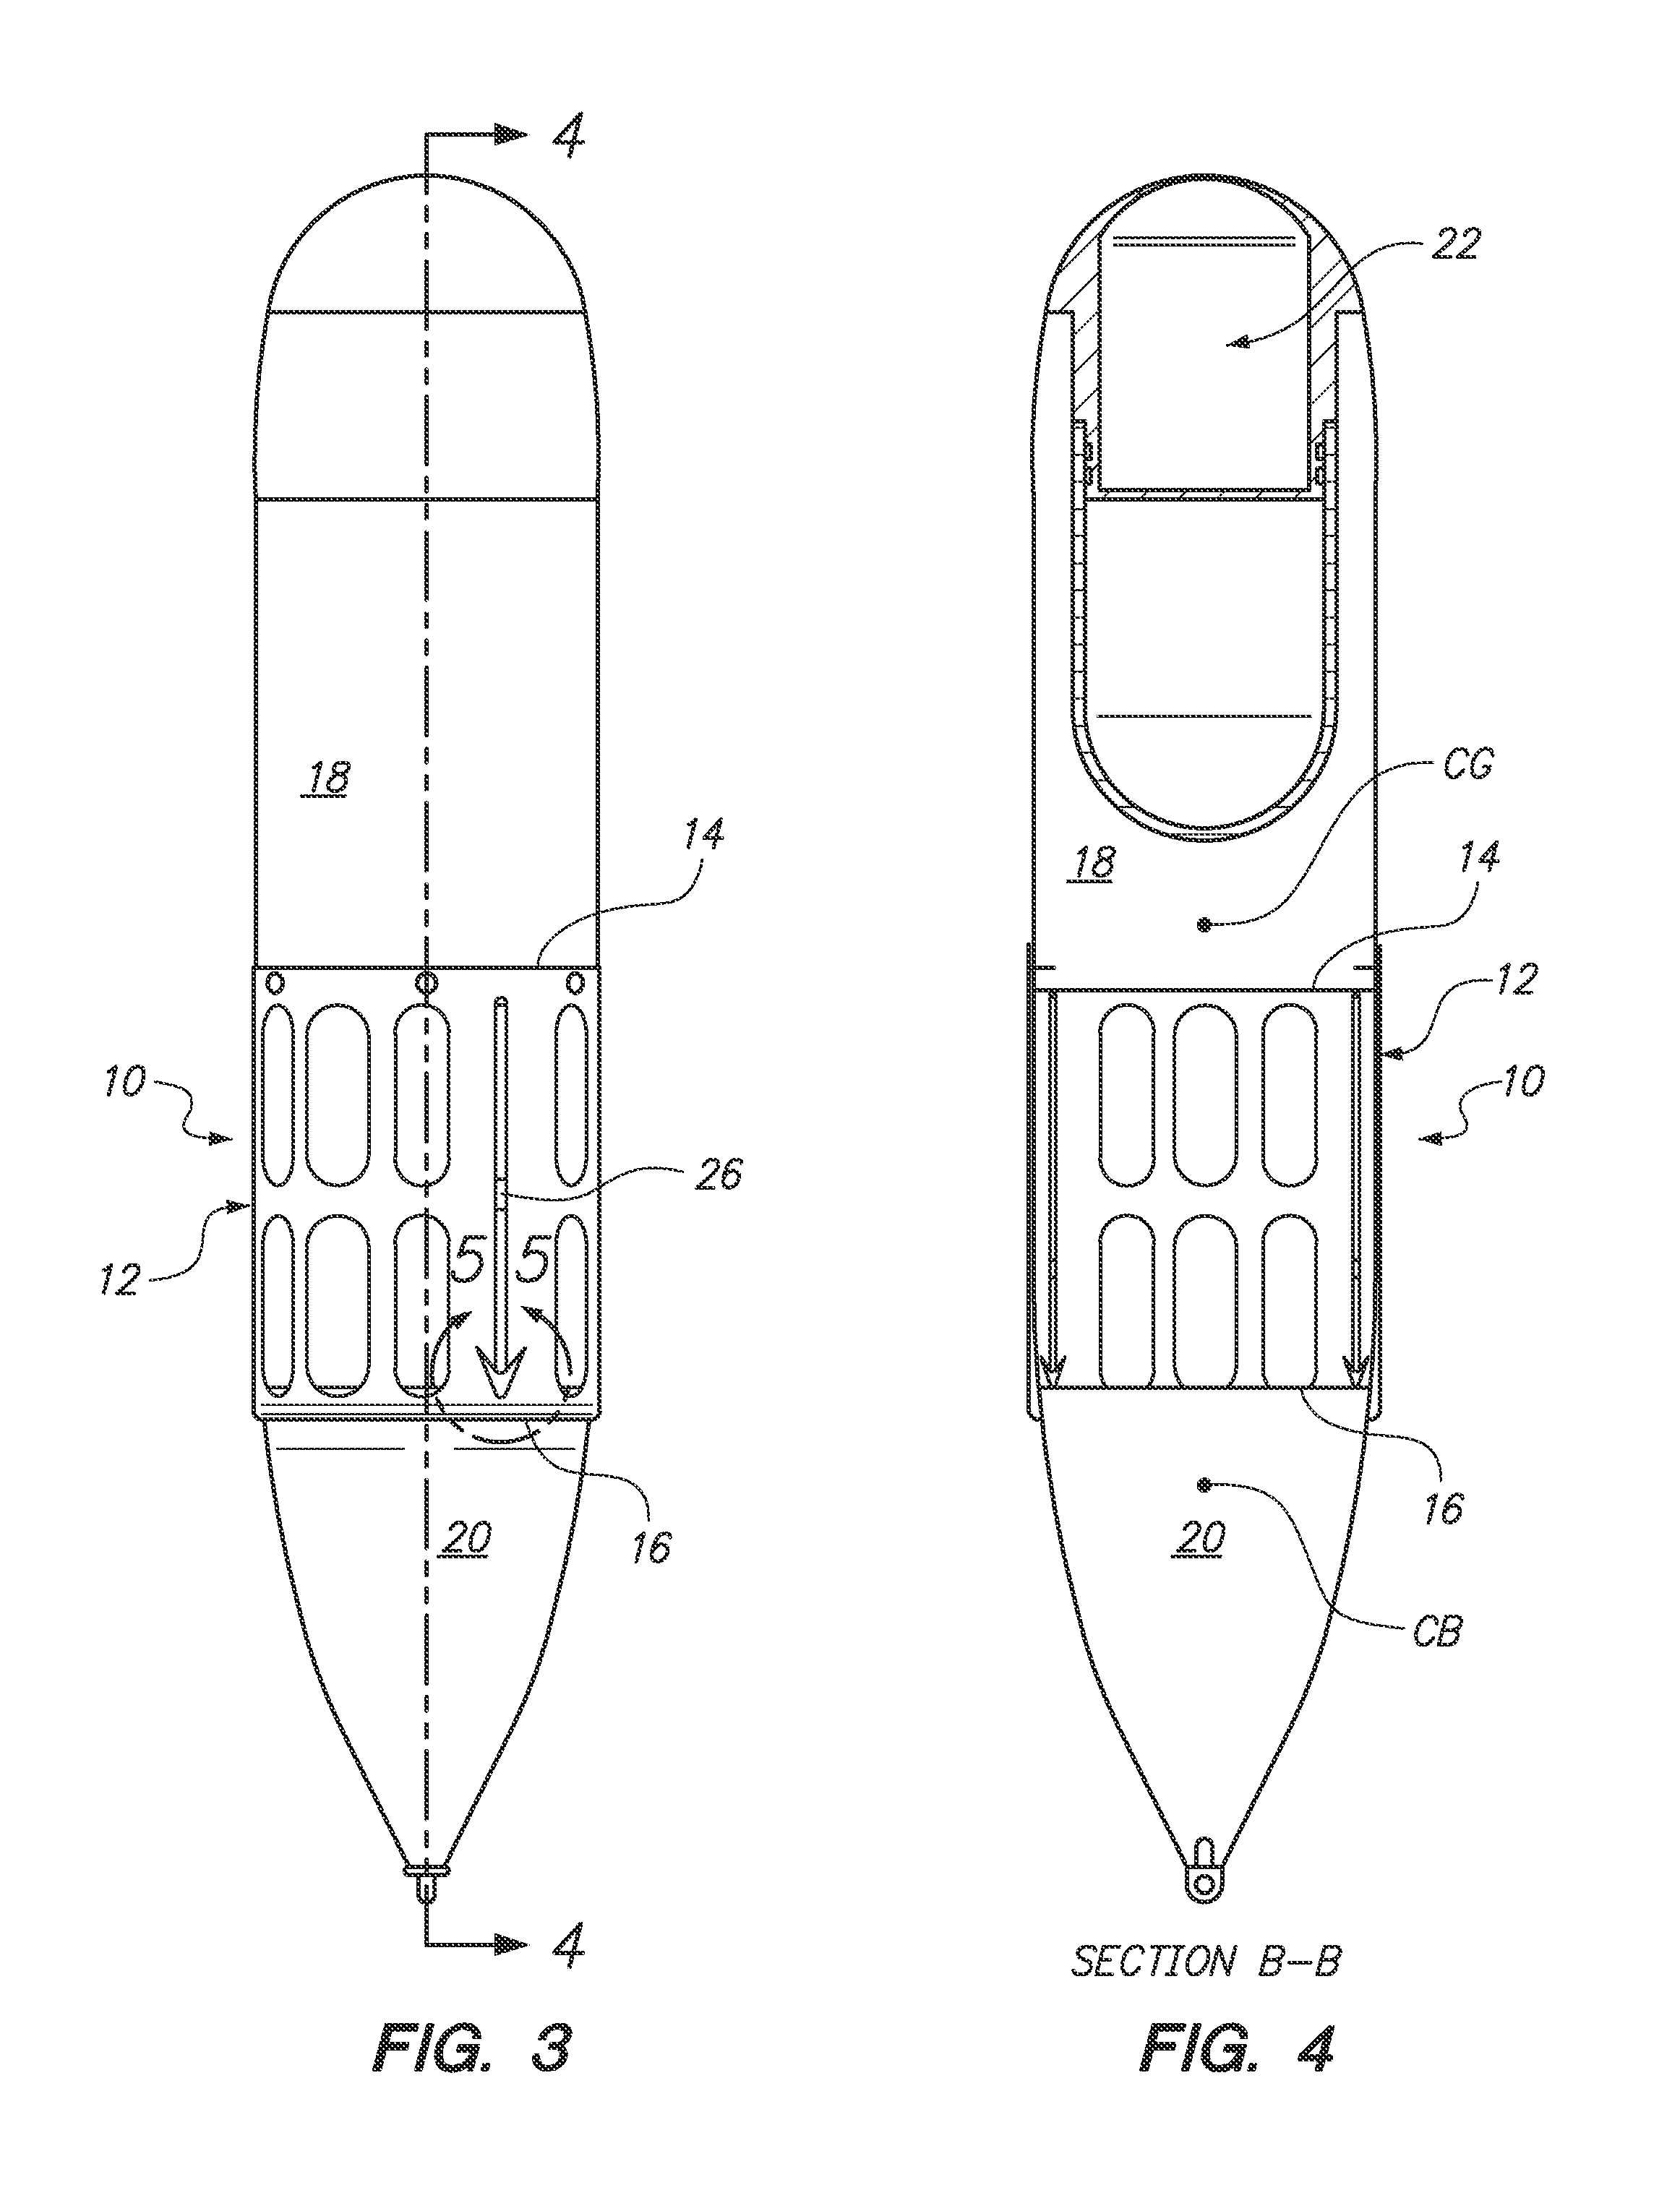 Self-stabilizing buoy and deployment methods